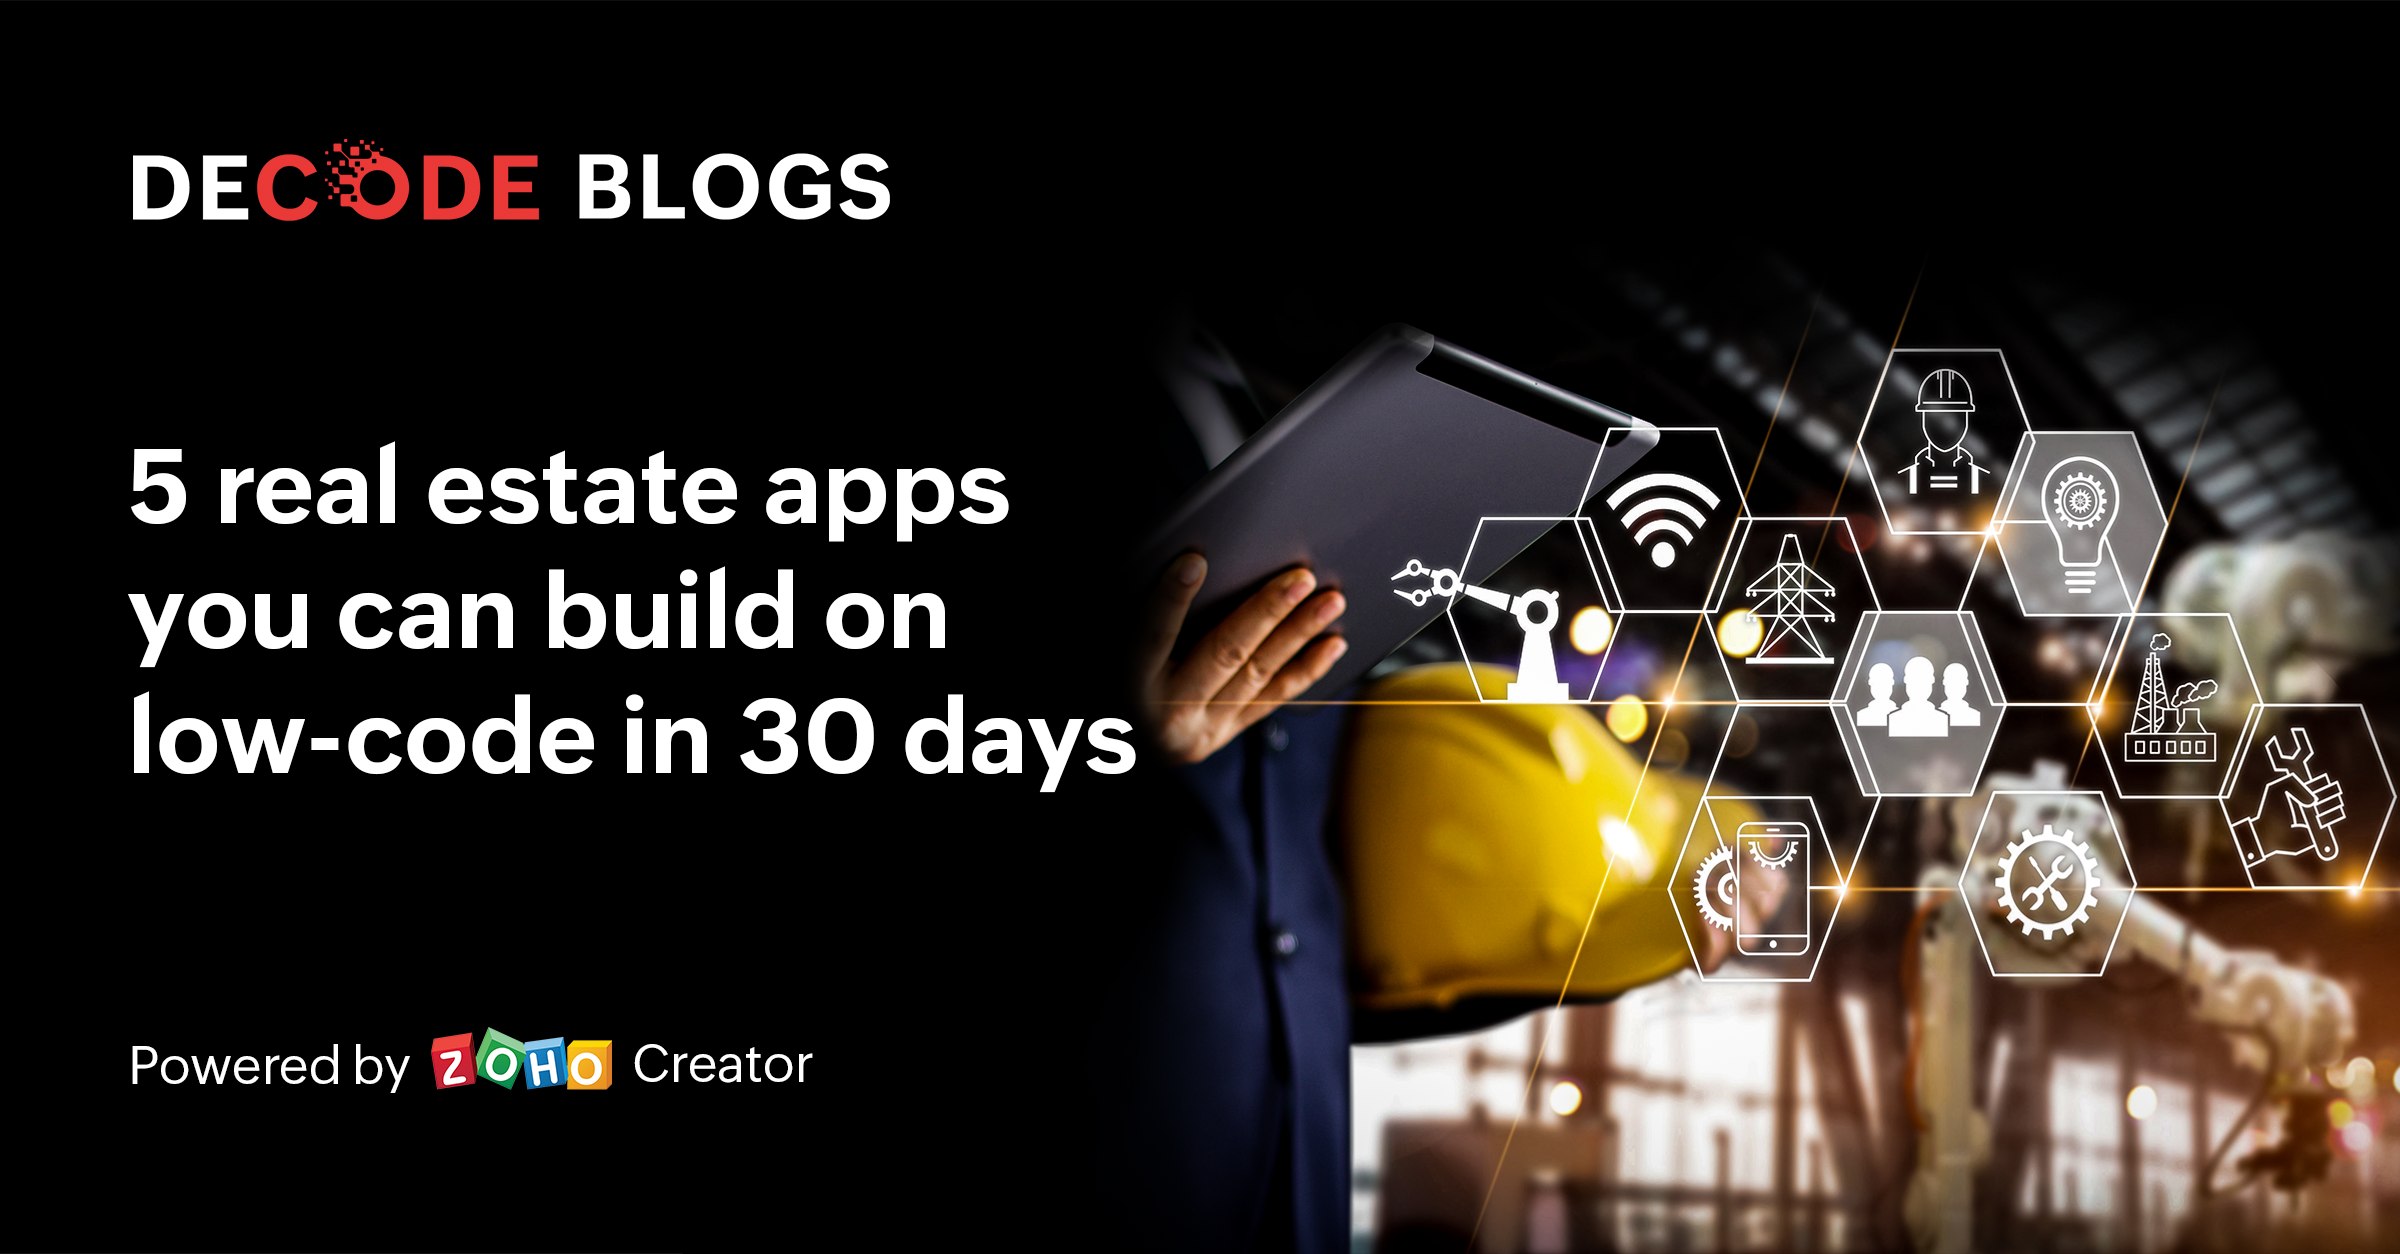 5 real estate apps you can build on low-code in 30 days